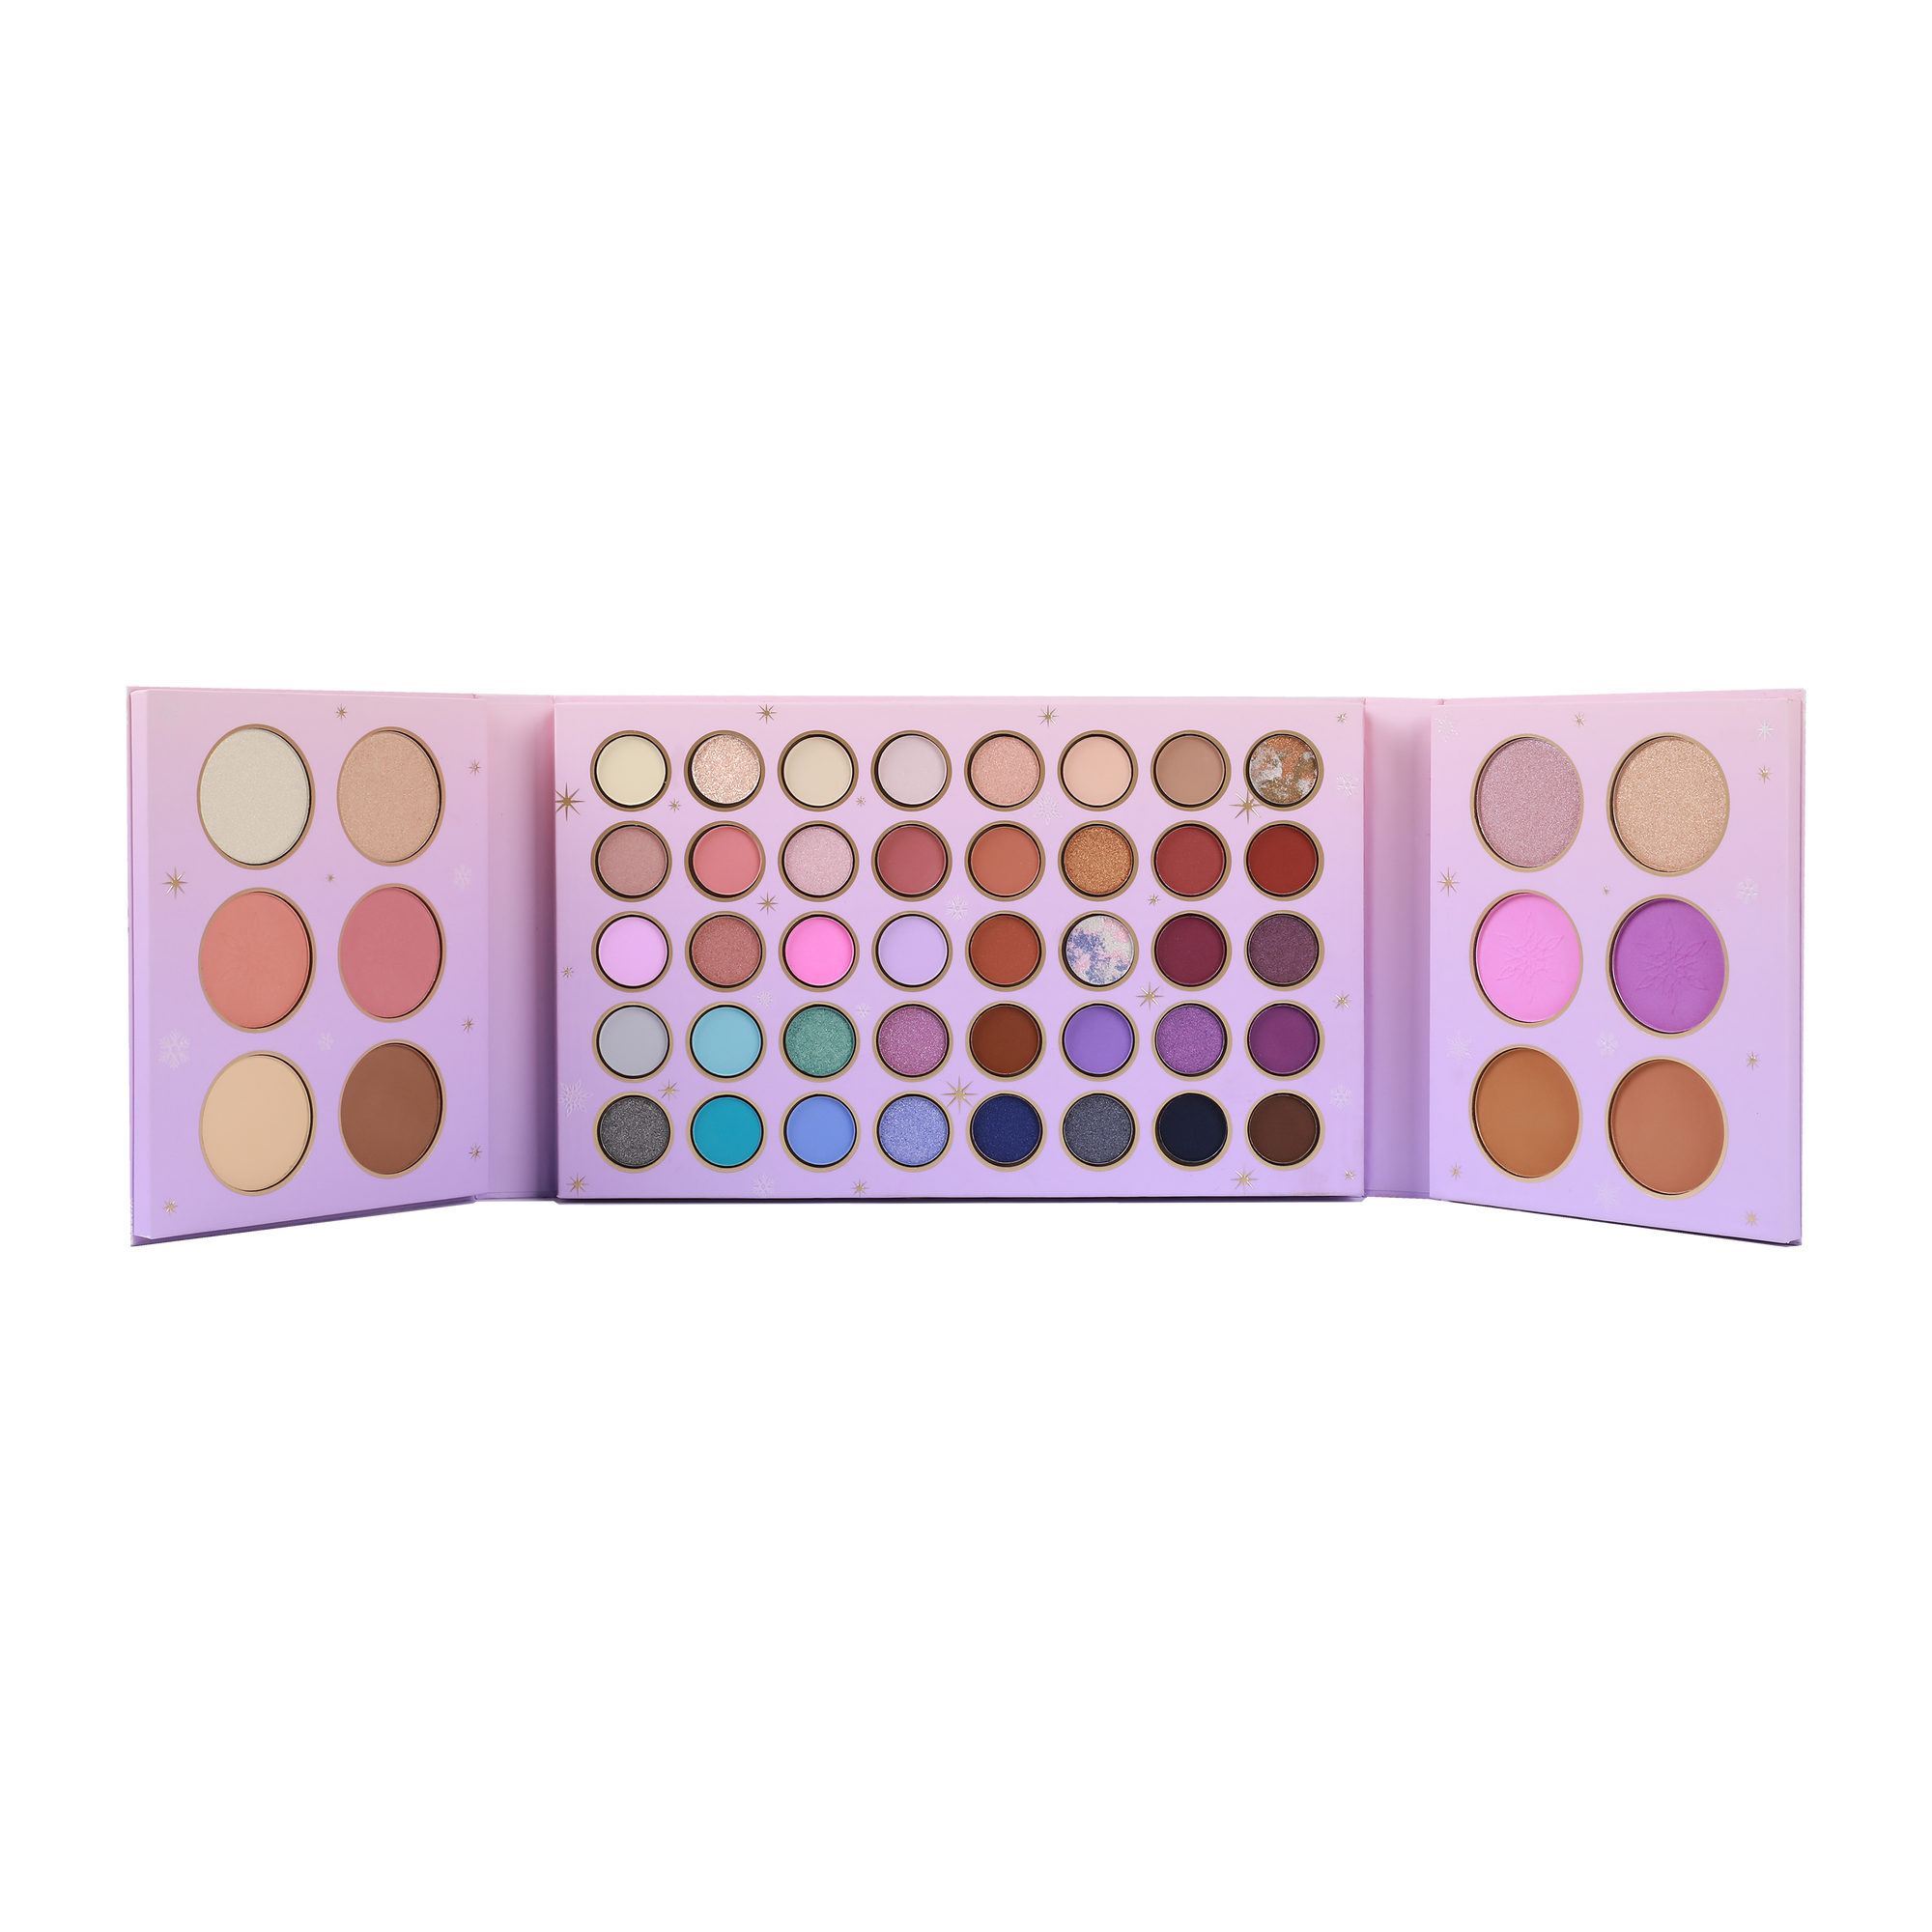 52 shade face and eye palette closed box